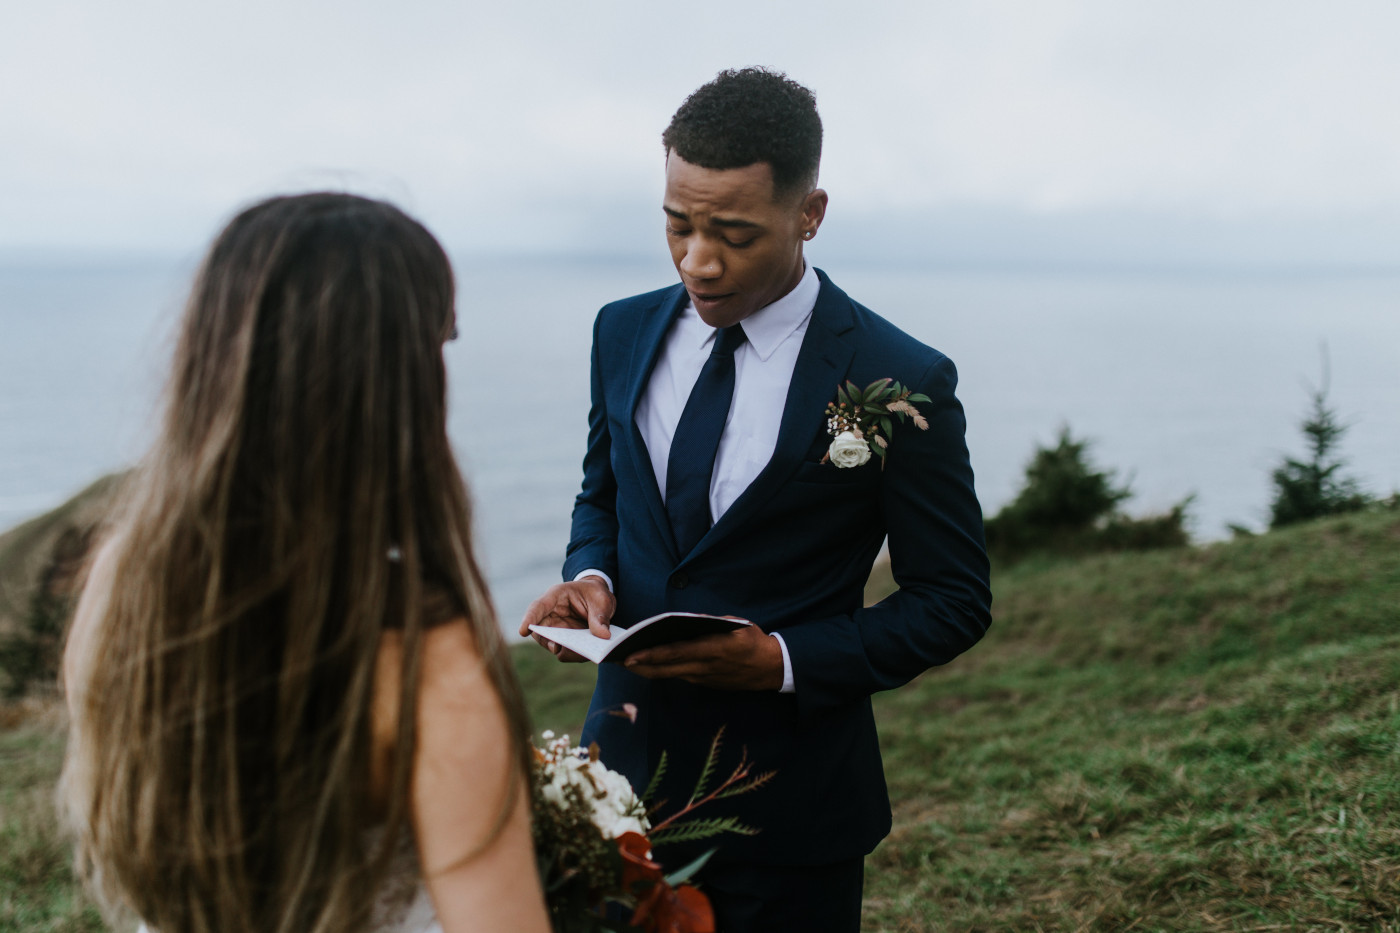 Deandre reads to Ariana. Elopement photography at Mount Hood by Sienna Plus Josh.